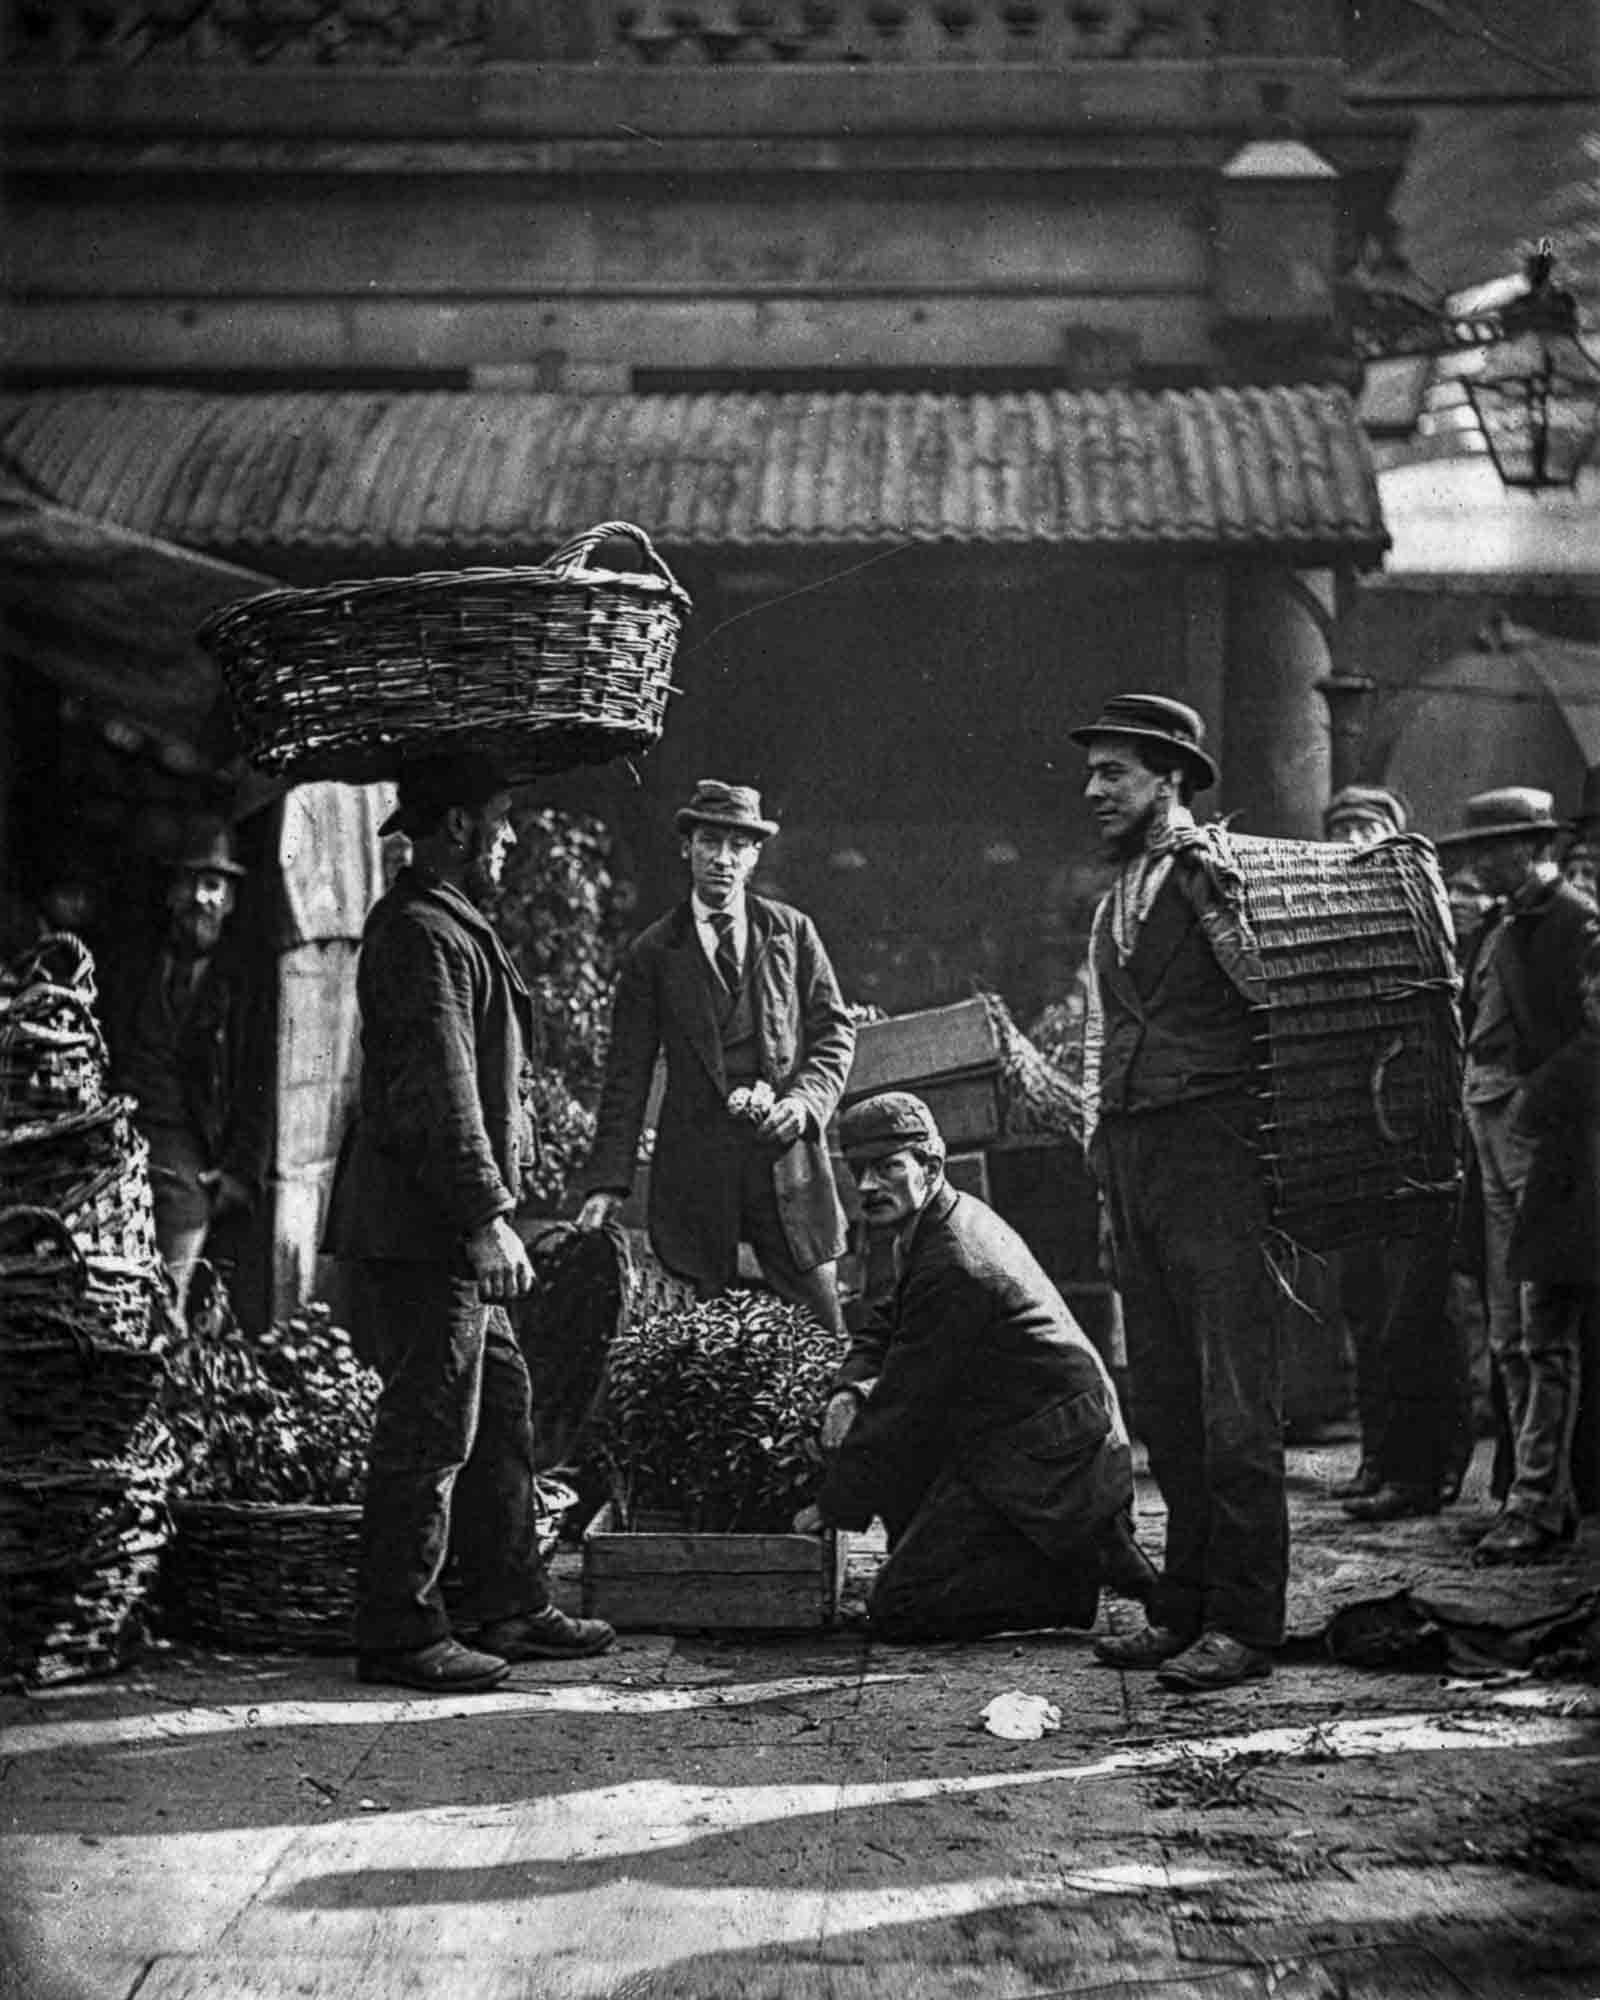 Porters with boxes of plants at Covent Garden market, 1877